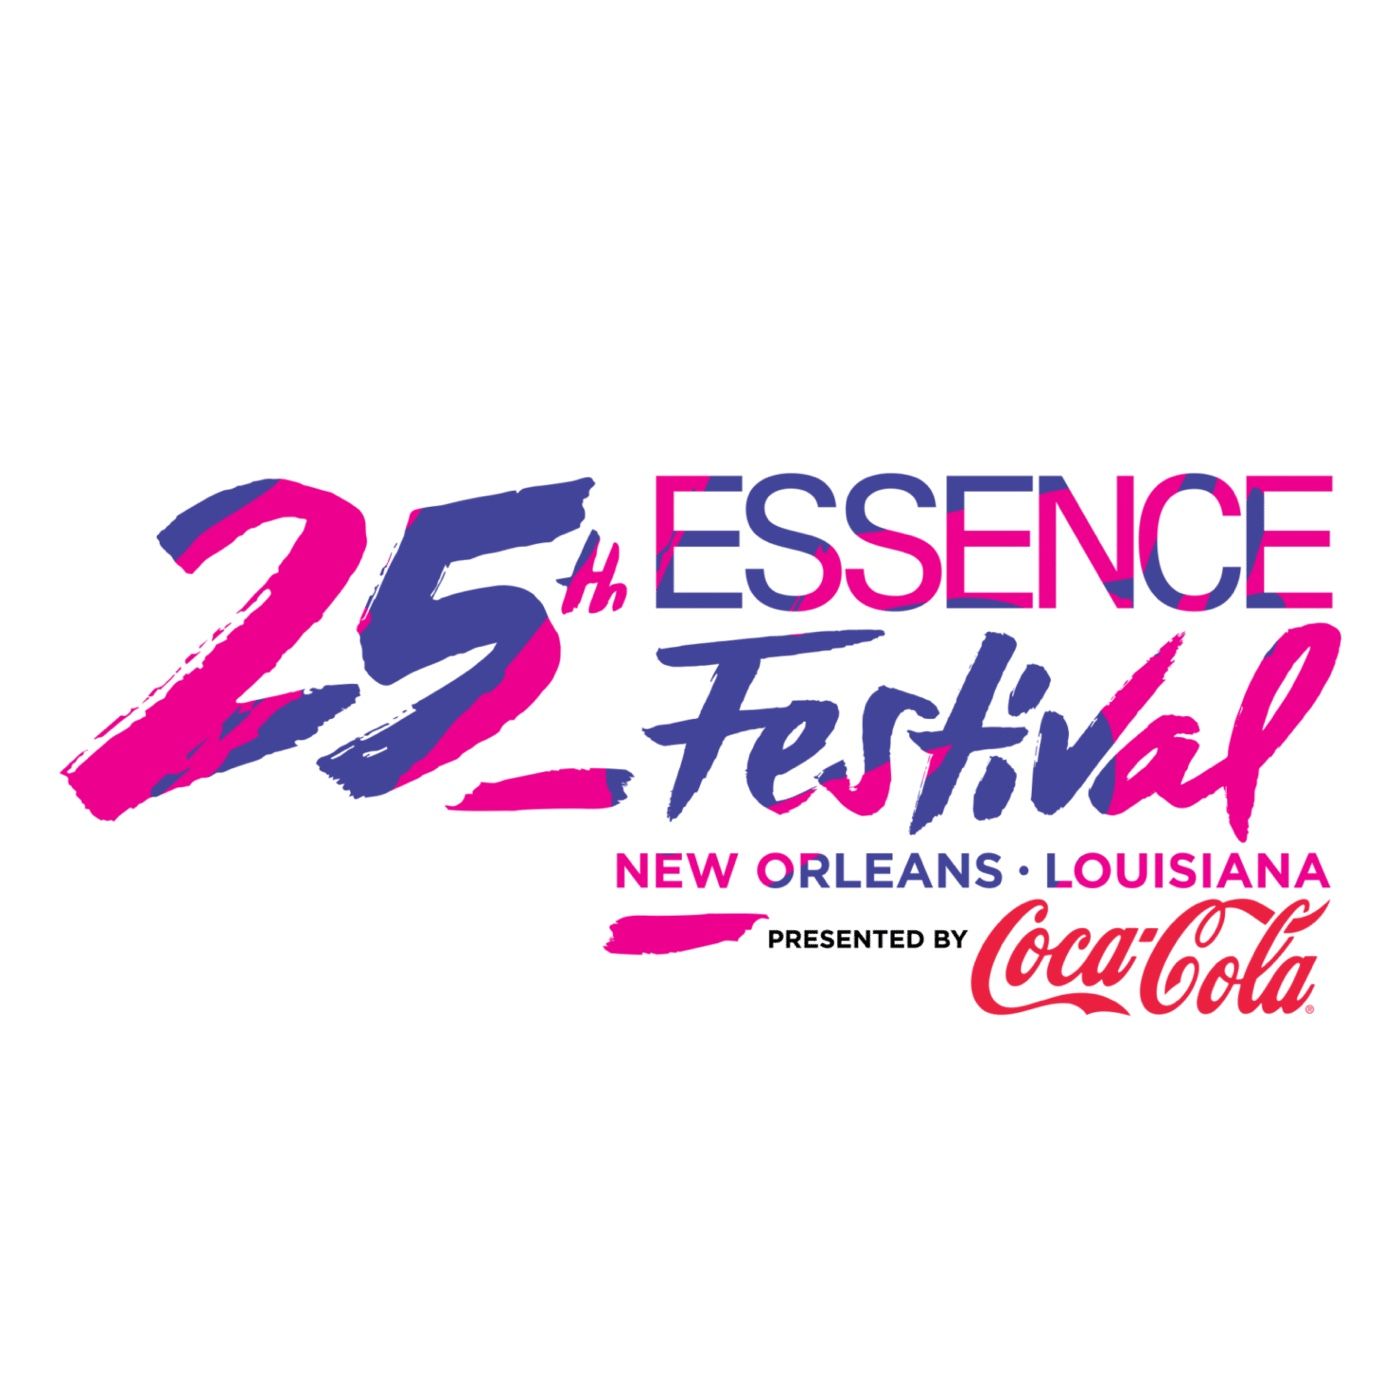 Episode 3 - Essence Weekend Tune In Today Live